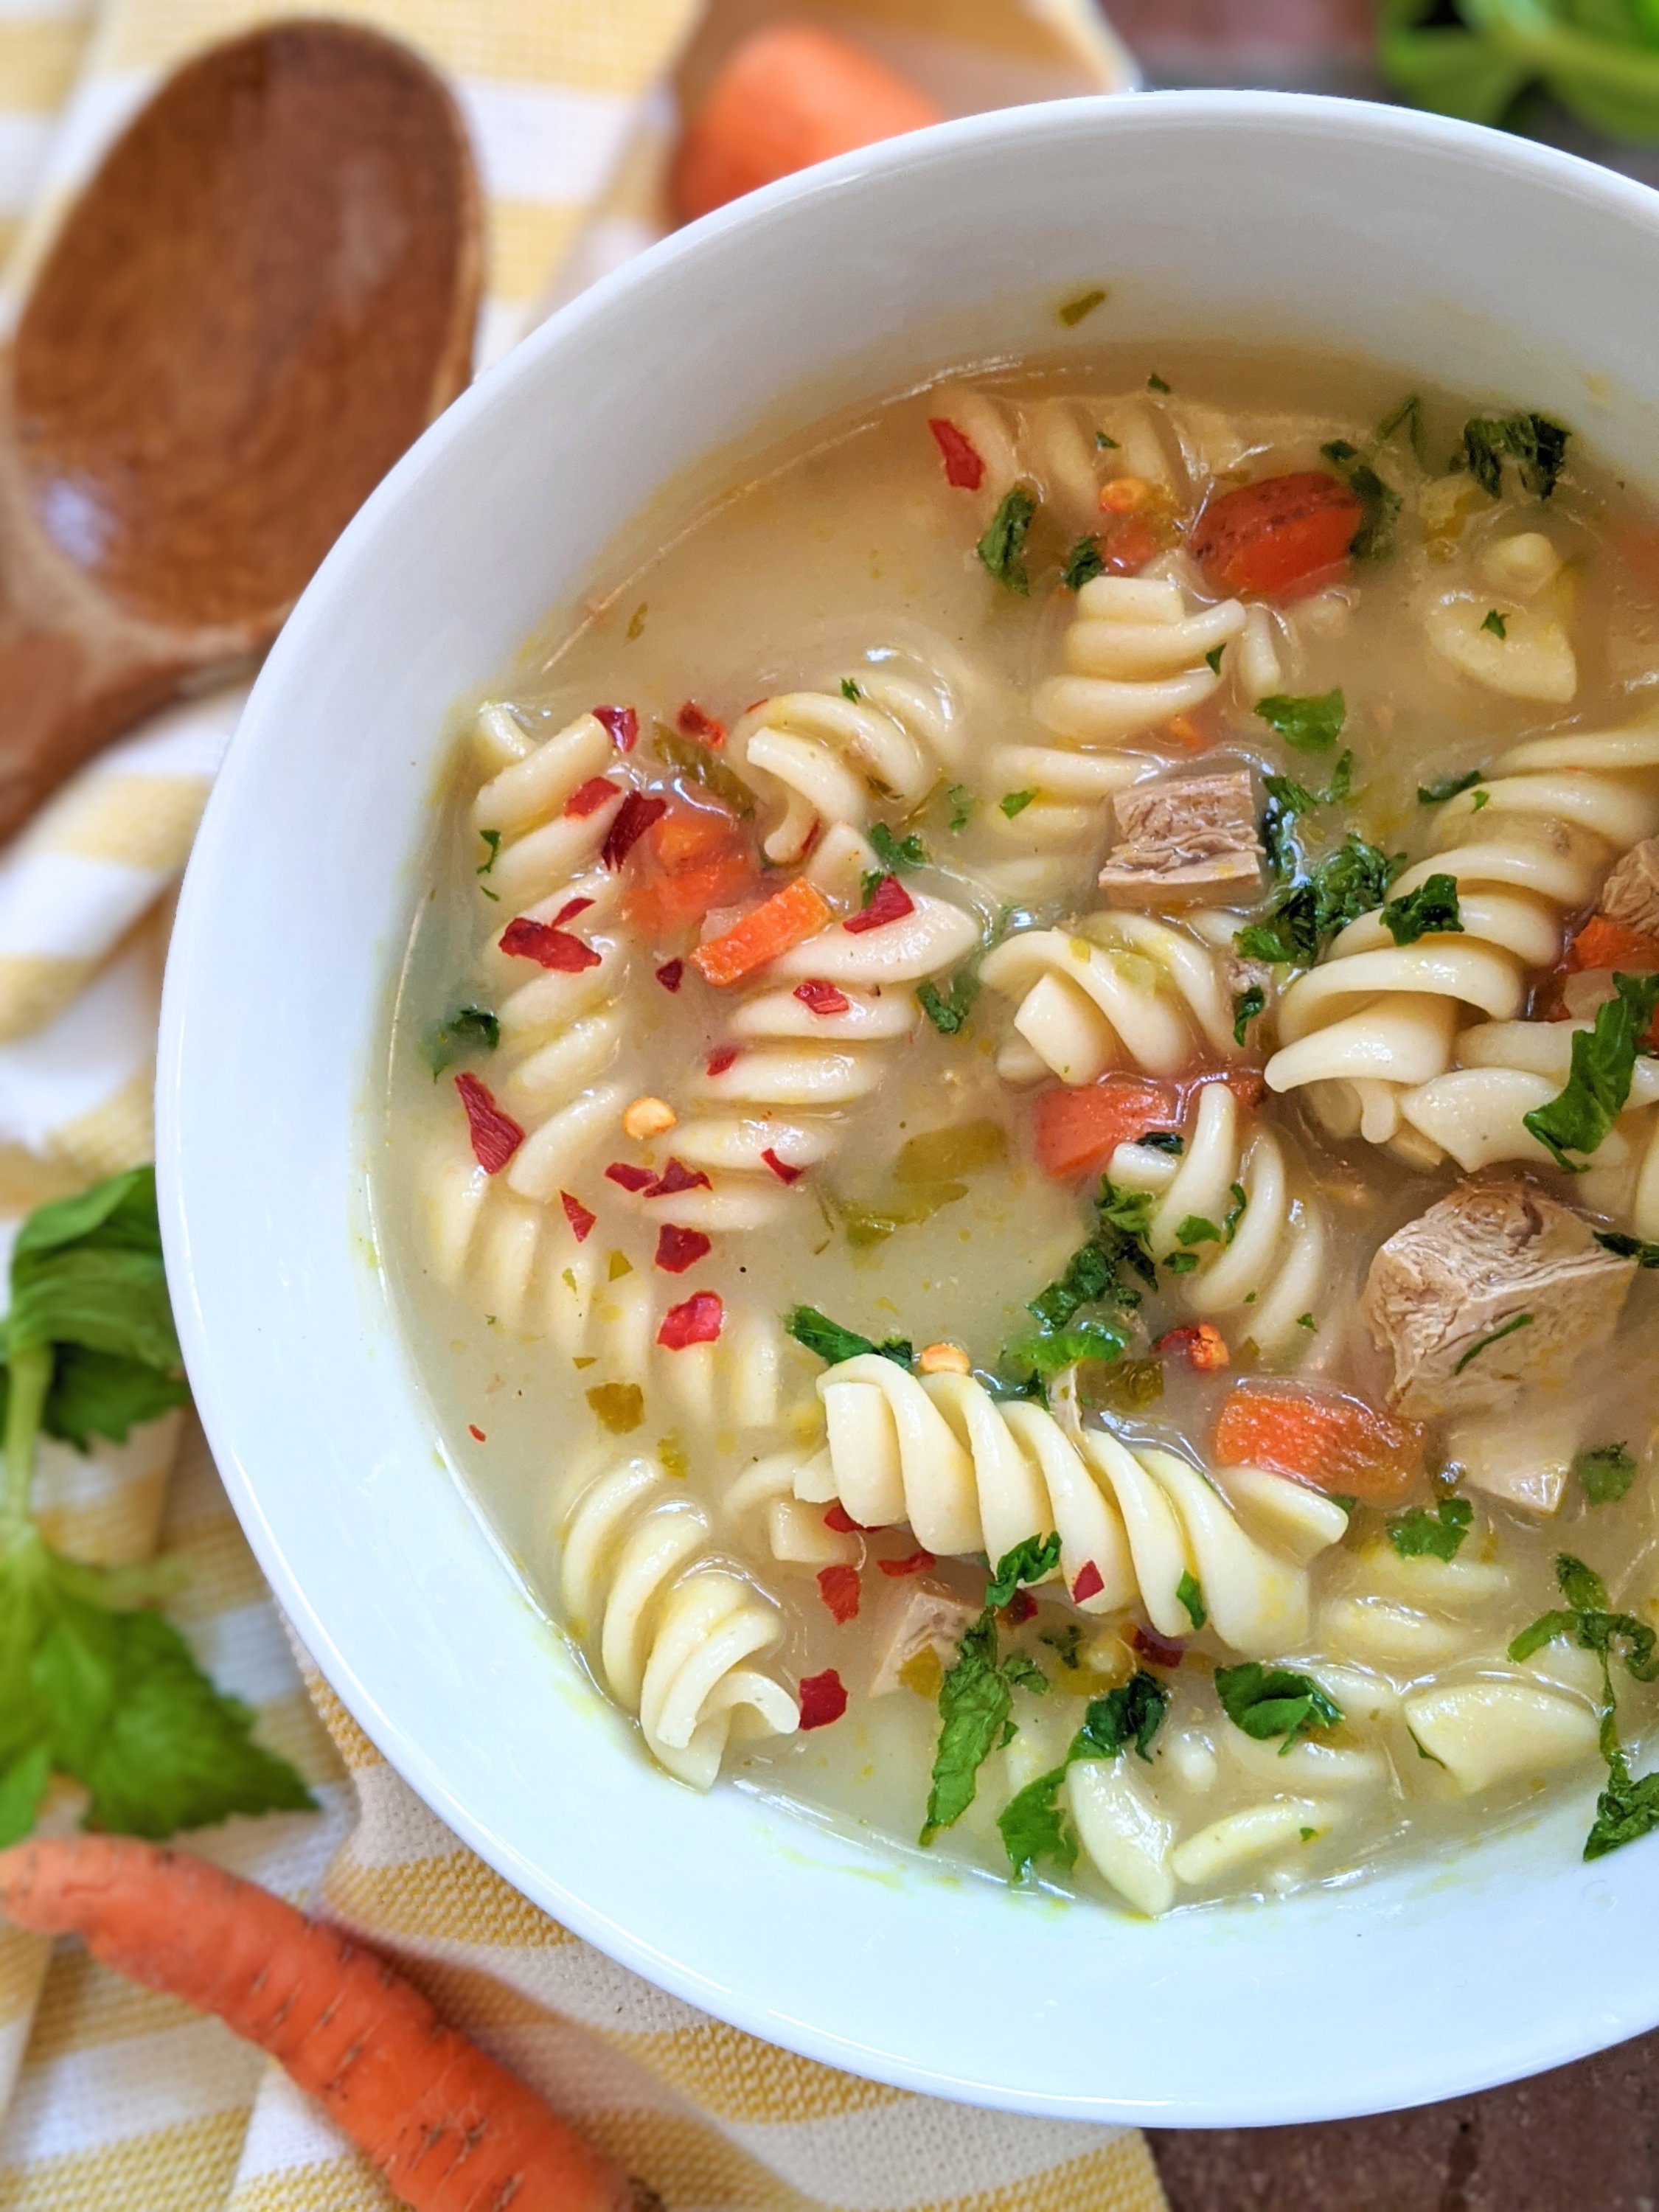 vegan chicken noodle soup recipe healthy high protein gluten free creamy soup with coconut milk and pasta vegetables and tofu